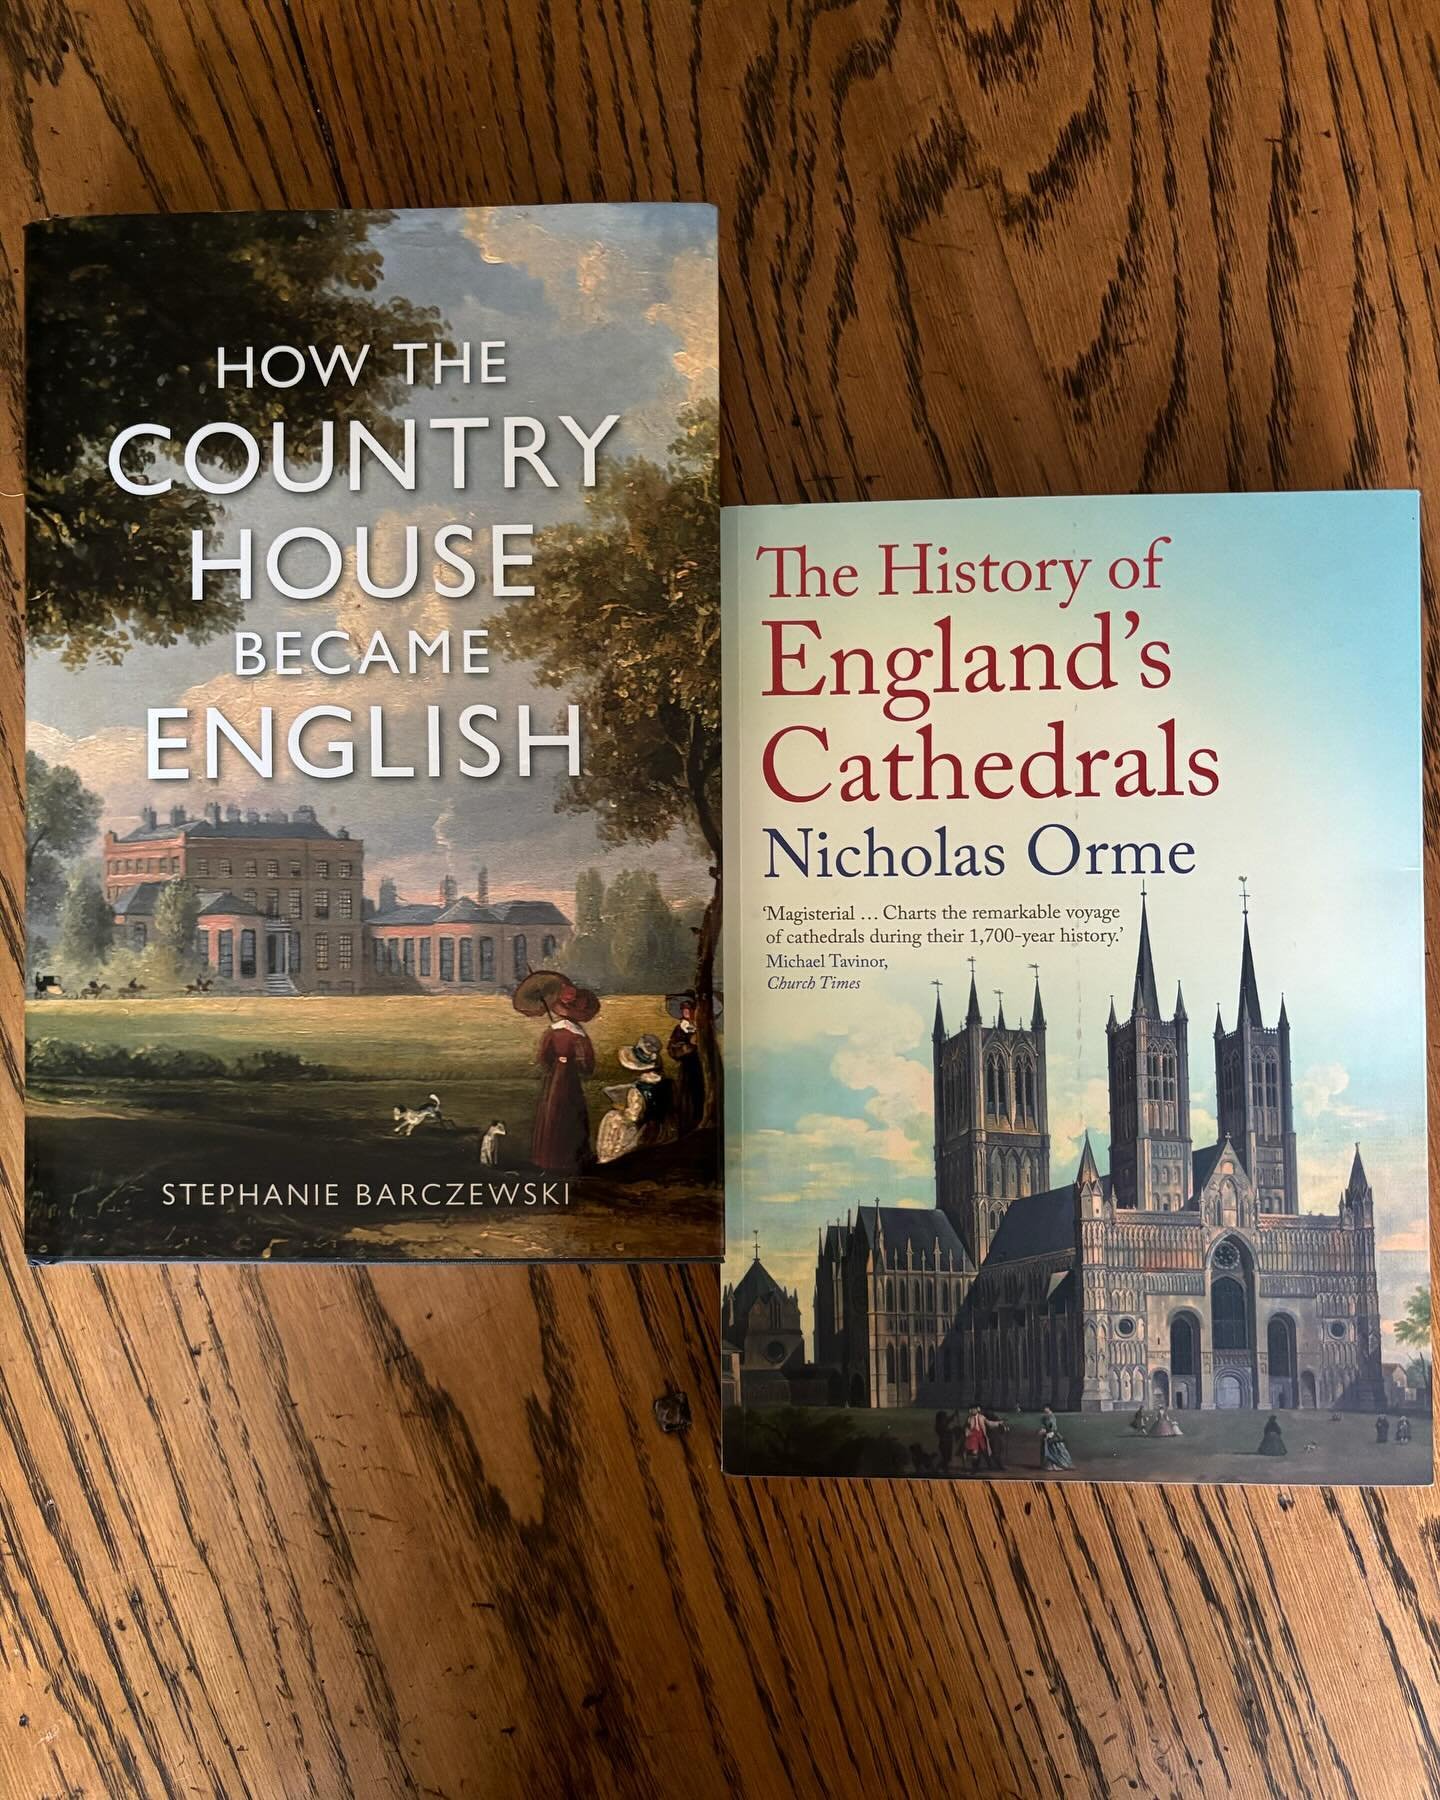 I&rsquo;m not entirely taking my eye off the ball during wedding season! These are my current dipping in&rsquo; books. 
#statelyhomesofengland #cathedralsofengland 

www.vivhaxby.com